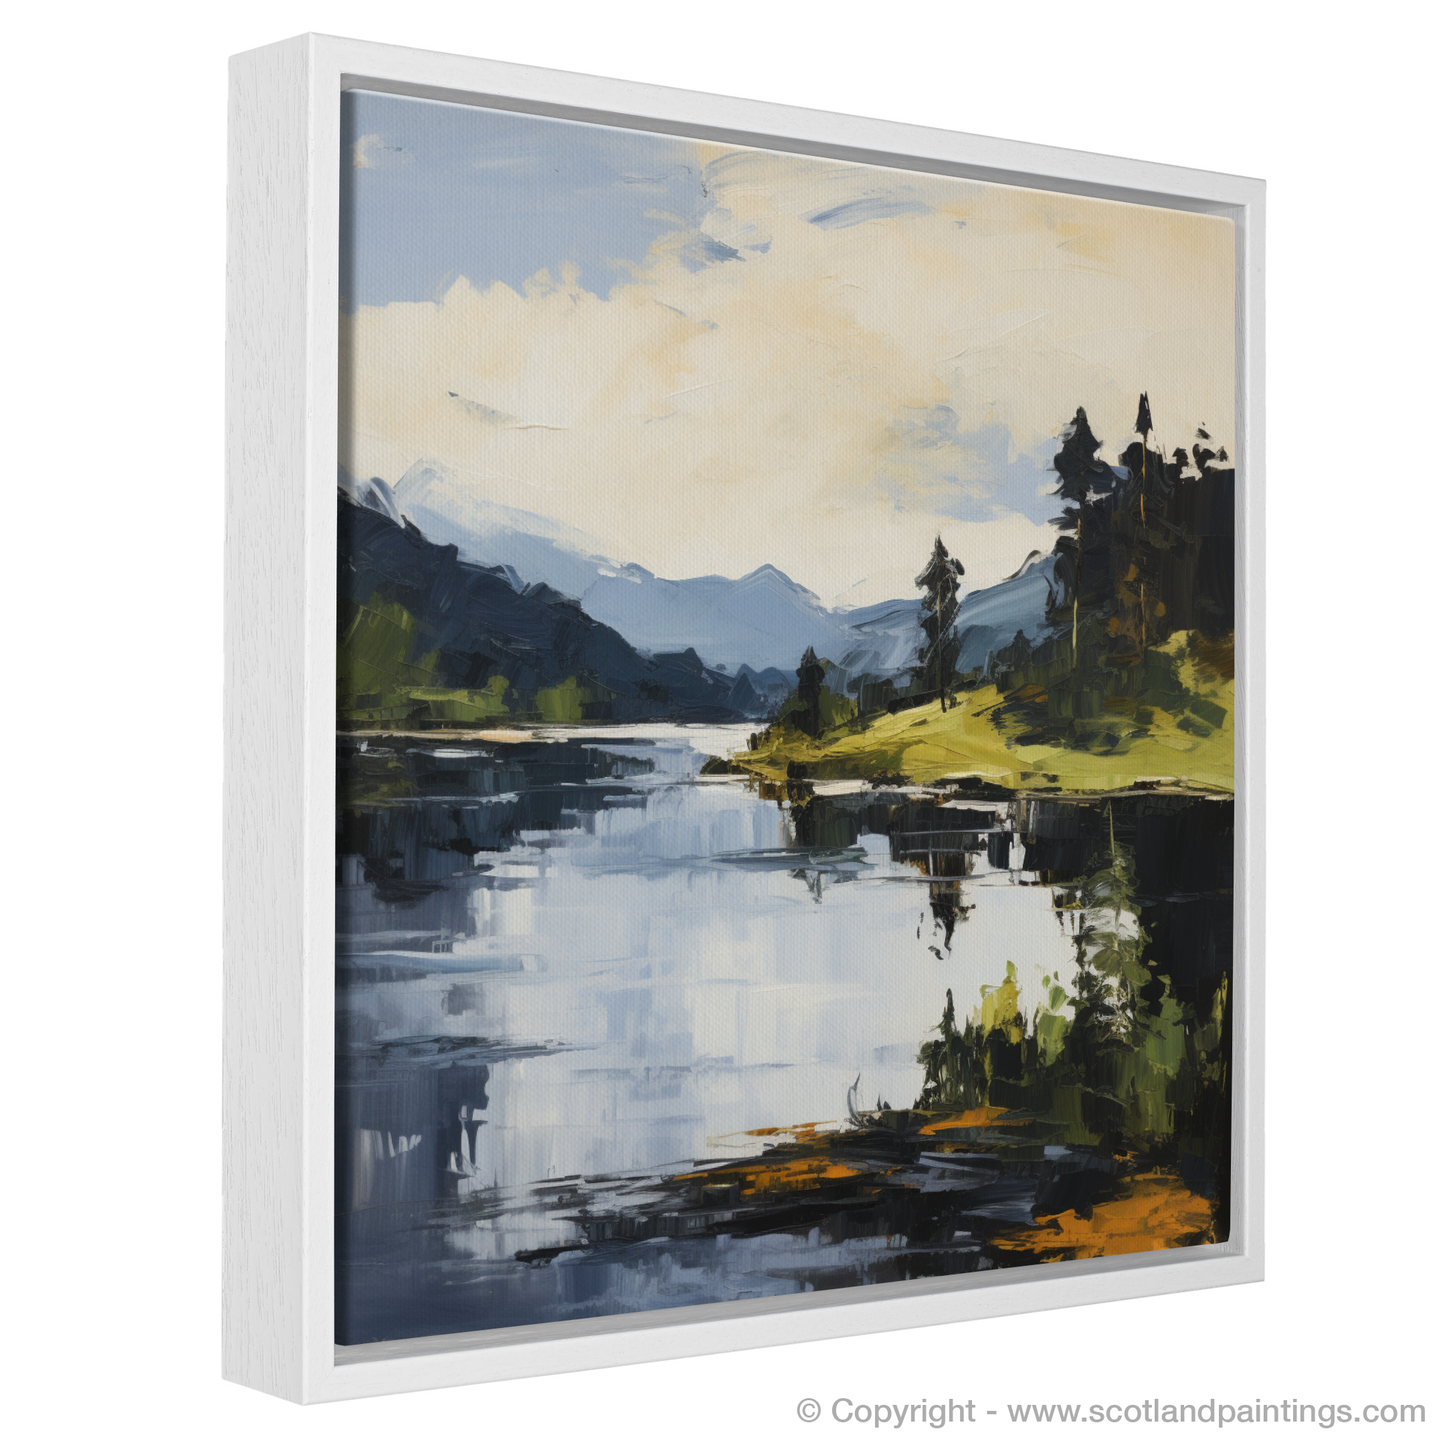 Painting and Art Print of Loch Ard, Stirling in summer entitled "Summer's Embrace at Loch Ard Stirling".